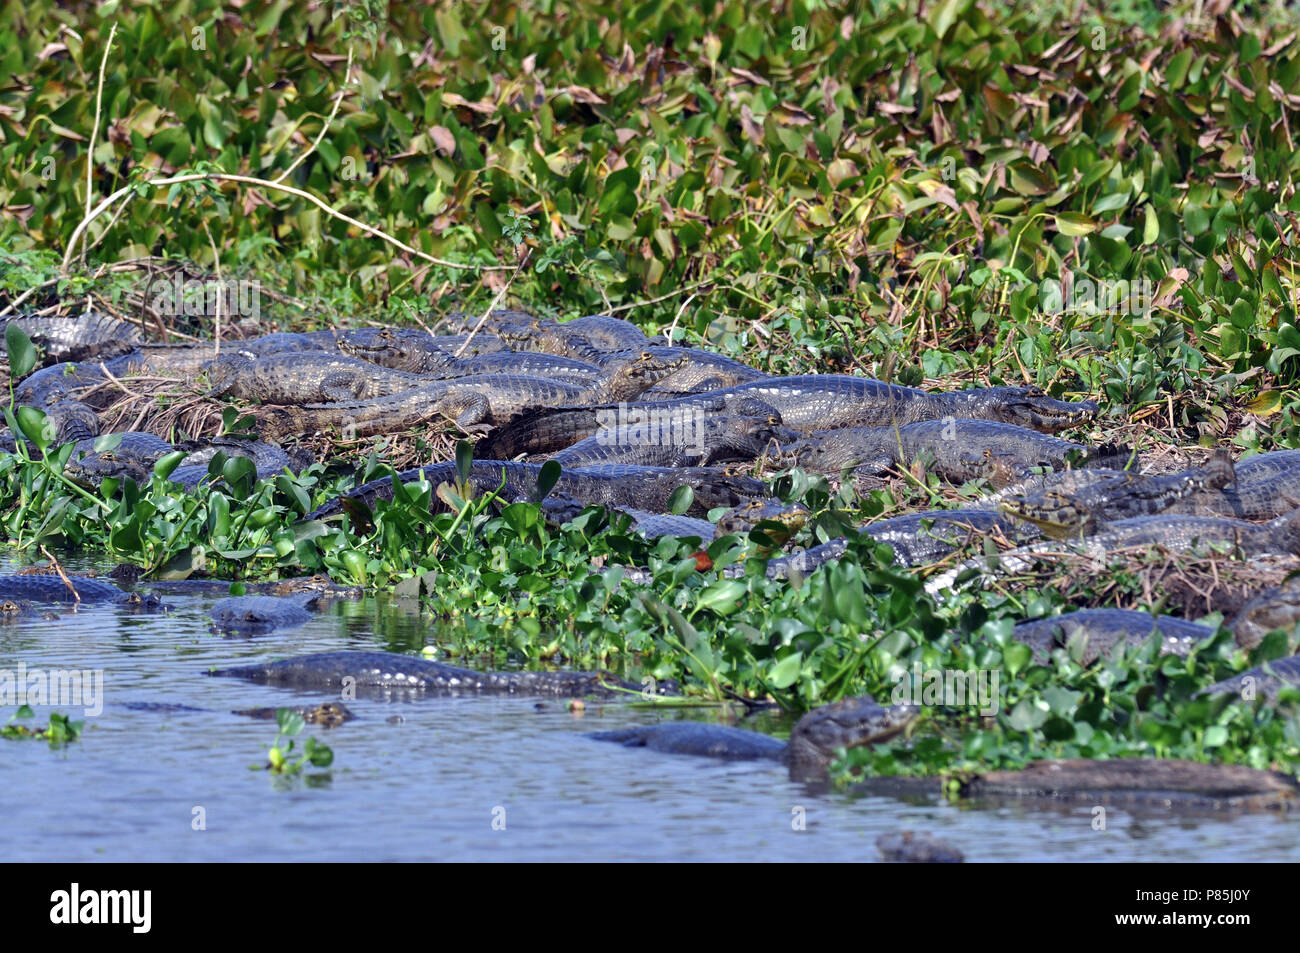 Spectacled Caiman in the Pantanal Stock Photo